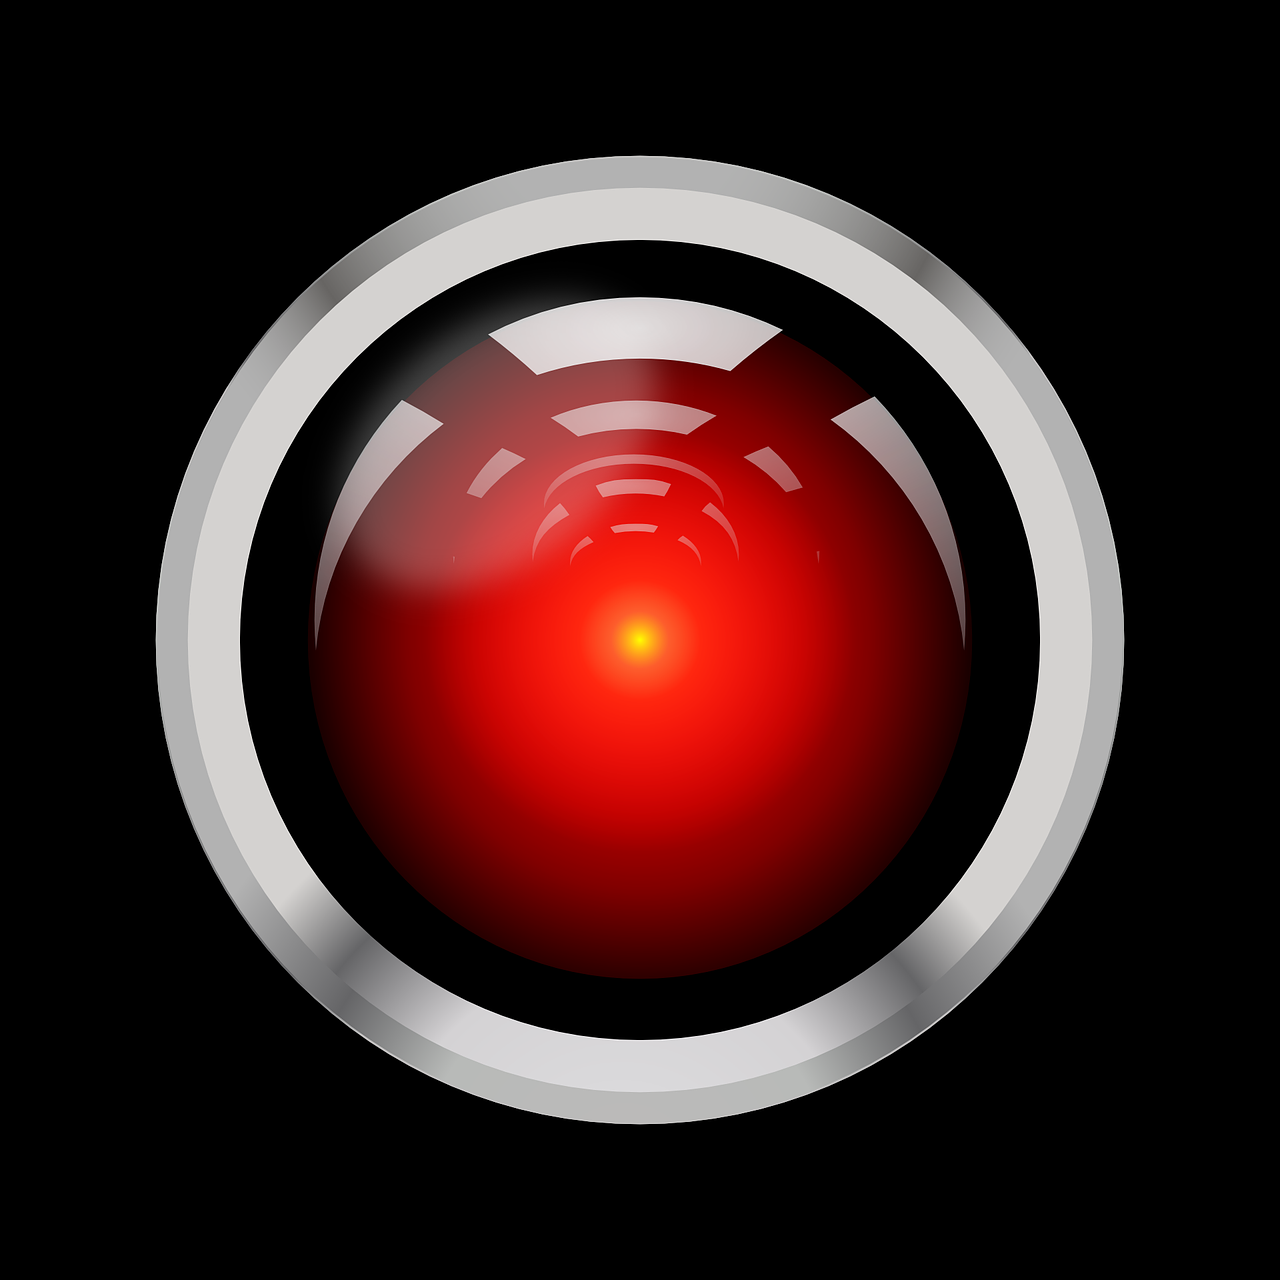 artificial intelligence hal 9000 computer space odyssey free photo